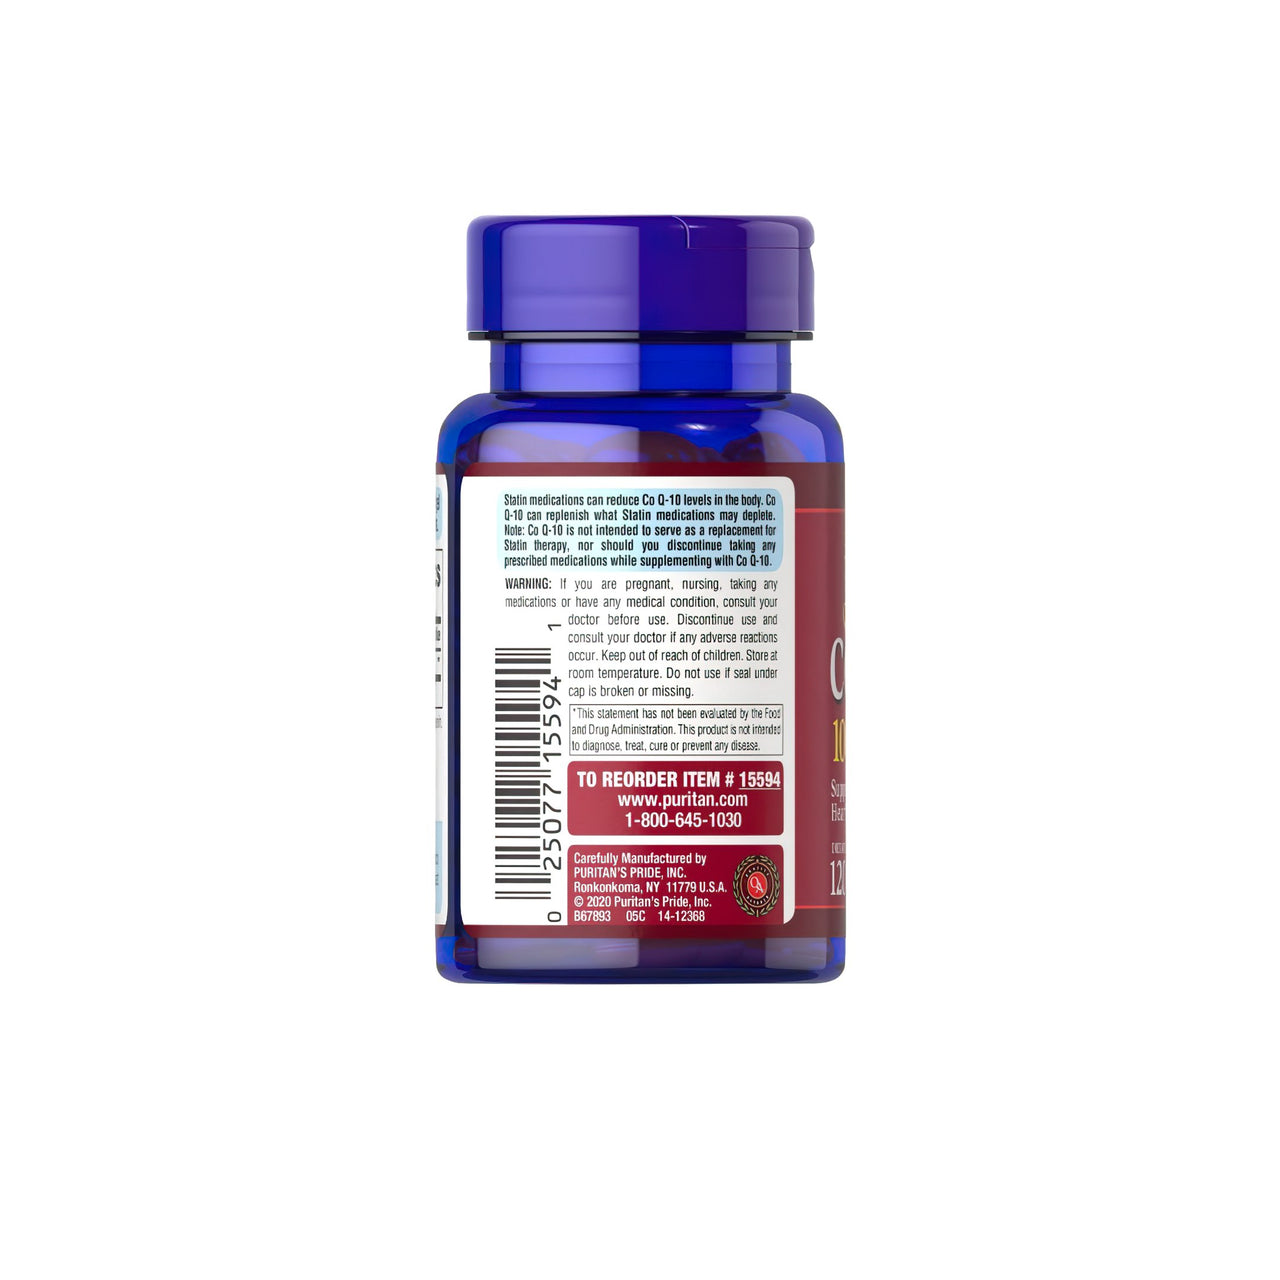 A bottle of Coenzyme Q10 100 mg - 120 Rapid Release Softgels by Puritan's Pride on a white background.